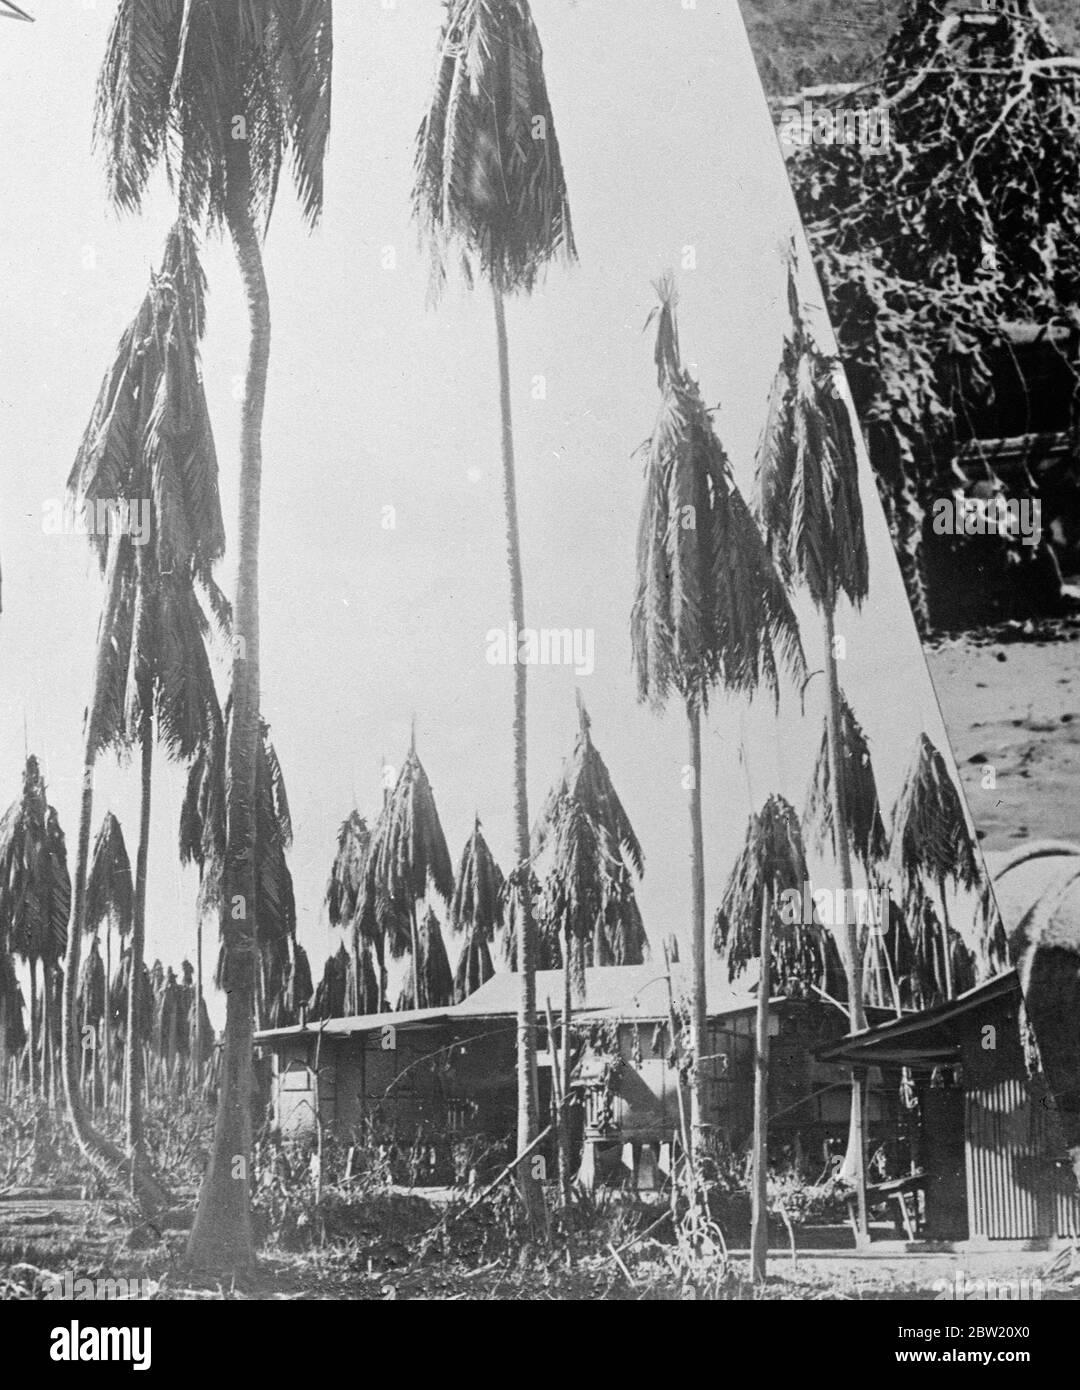 First pictures of volcano disaster on New Guinea island. Three volcanoes, 2 on Vulcan Island and one on the Matupi Island, erupted violently showering pumice and mud on the roofs of Rabaul chief town of New Britain Island in New Guinea. Photo shows: coconut palms heavily damaged by volcanic ash at Rabaul. 18 June 1937 Stock Photo